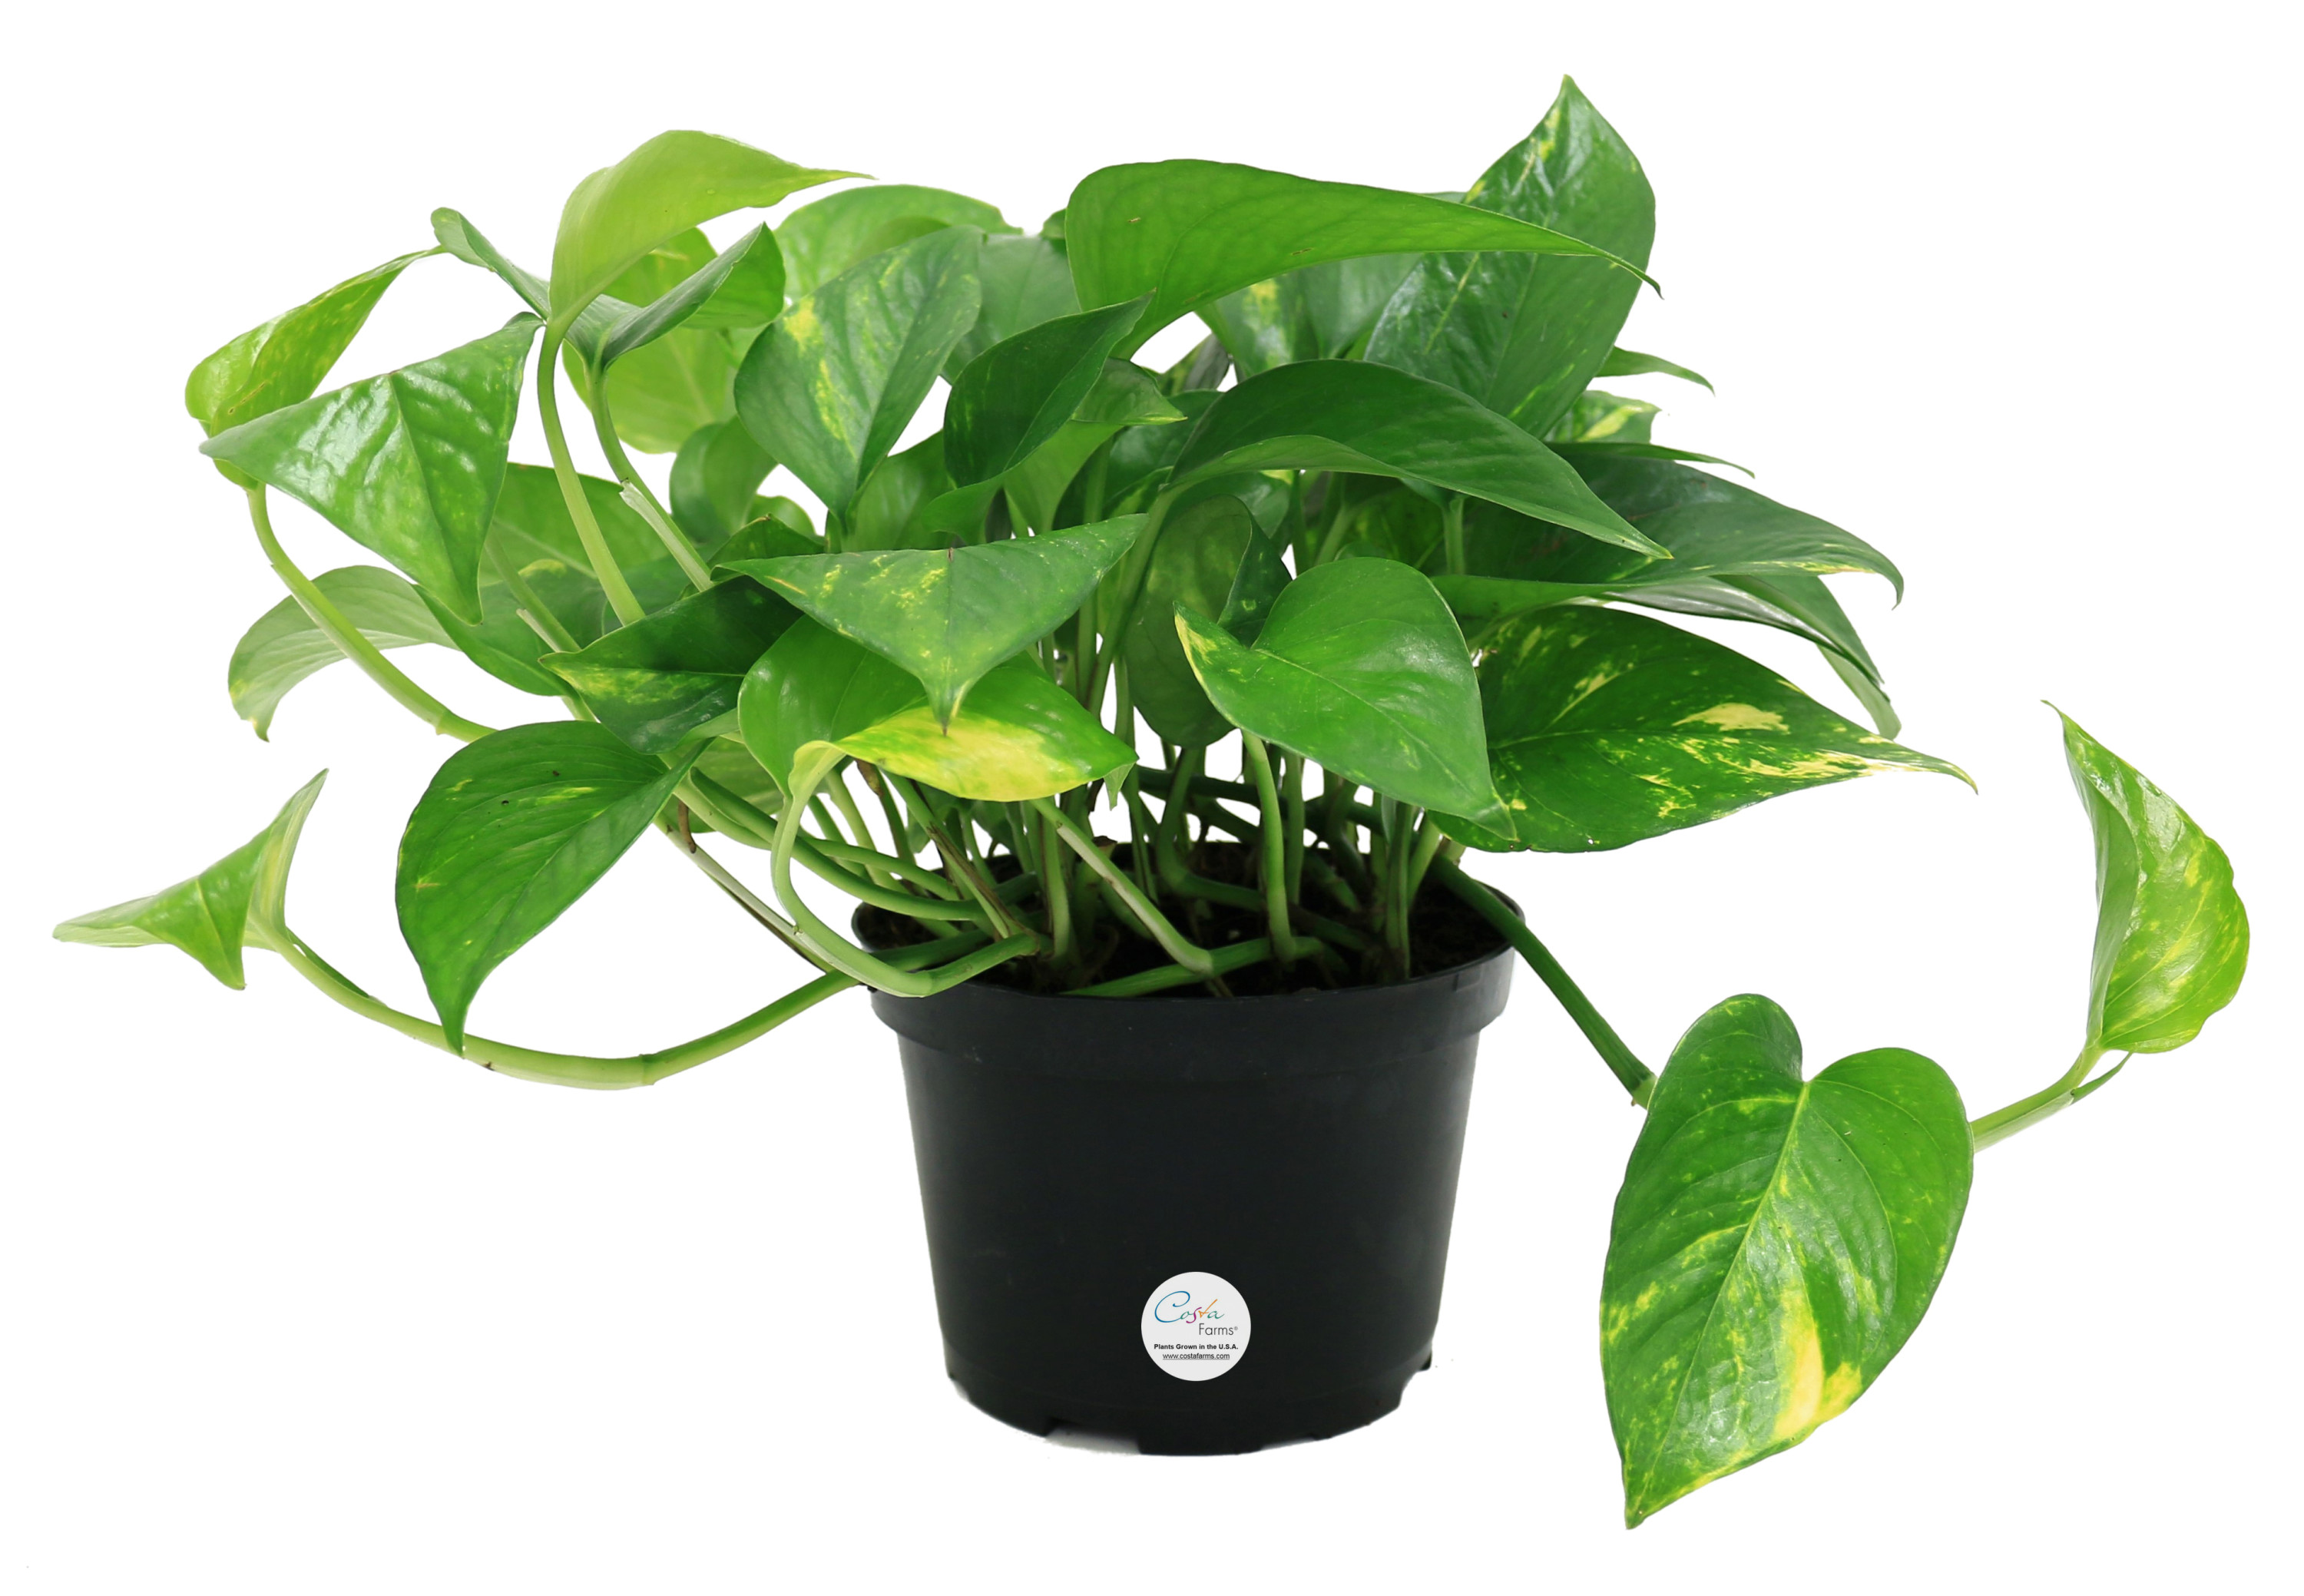 Costa Farms Live Indoor 10in. Tall Devil's Ivy Pothos; Medium, Indirect Light Plant in 6in. Grower Pot - image 1 of 11